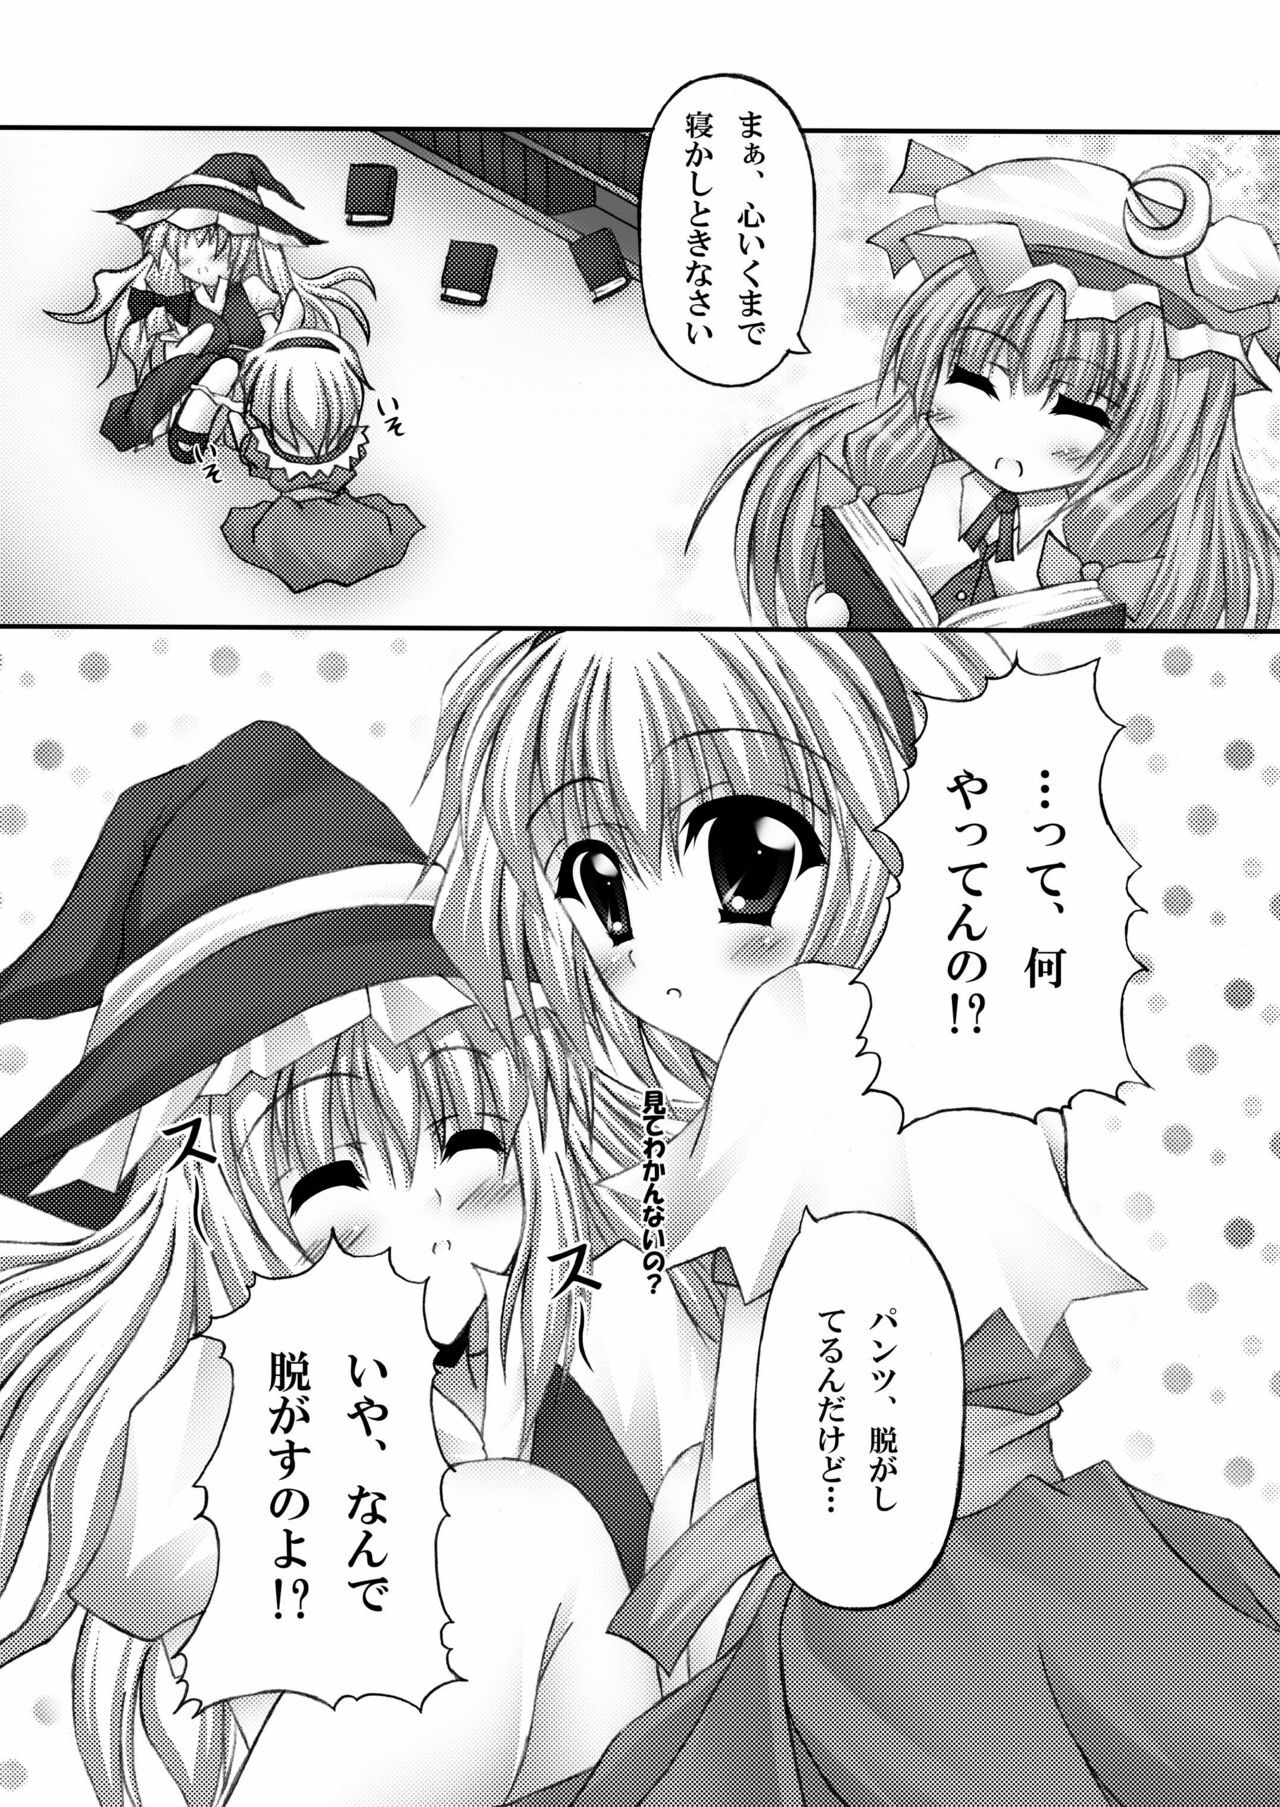 [Chronicle (YUKITO)] Only my wizard (Touhou Project) [Digital] page 7 full